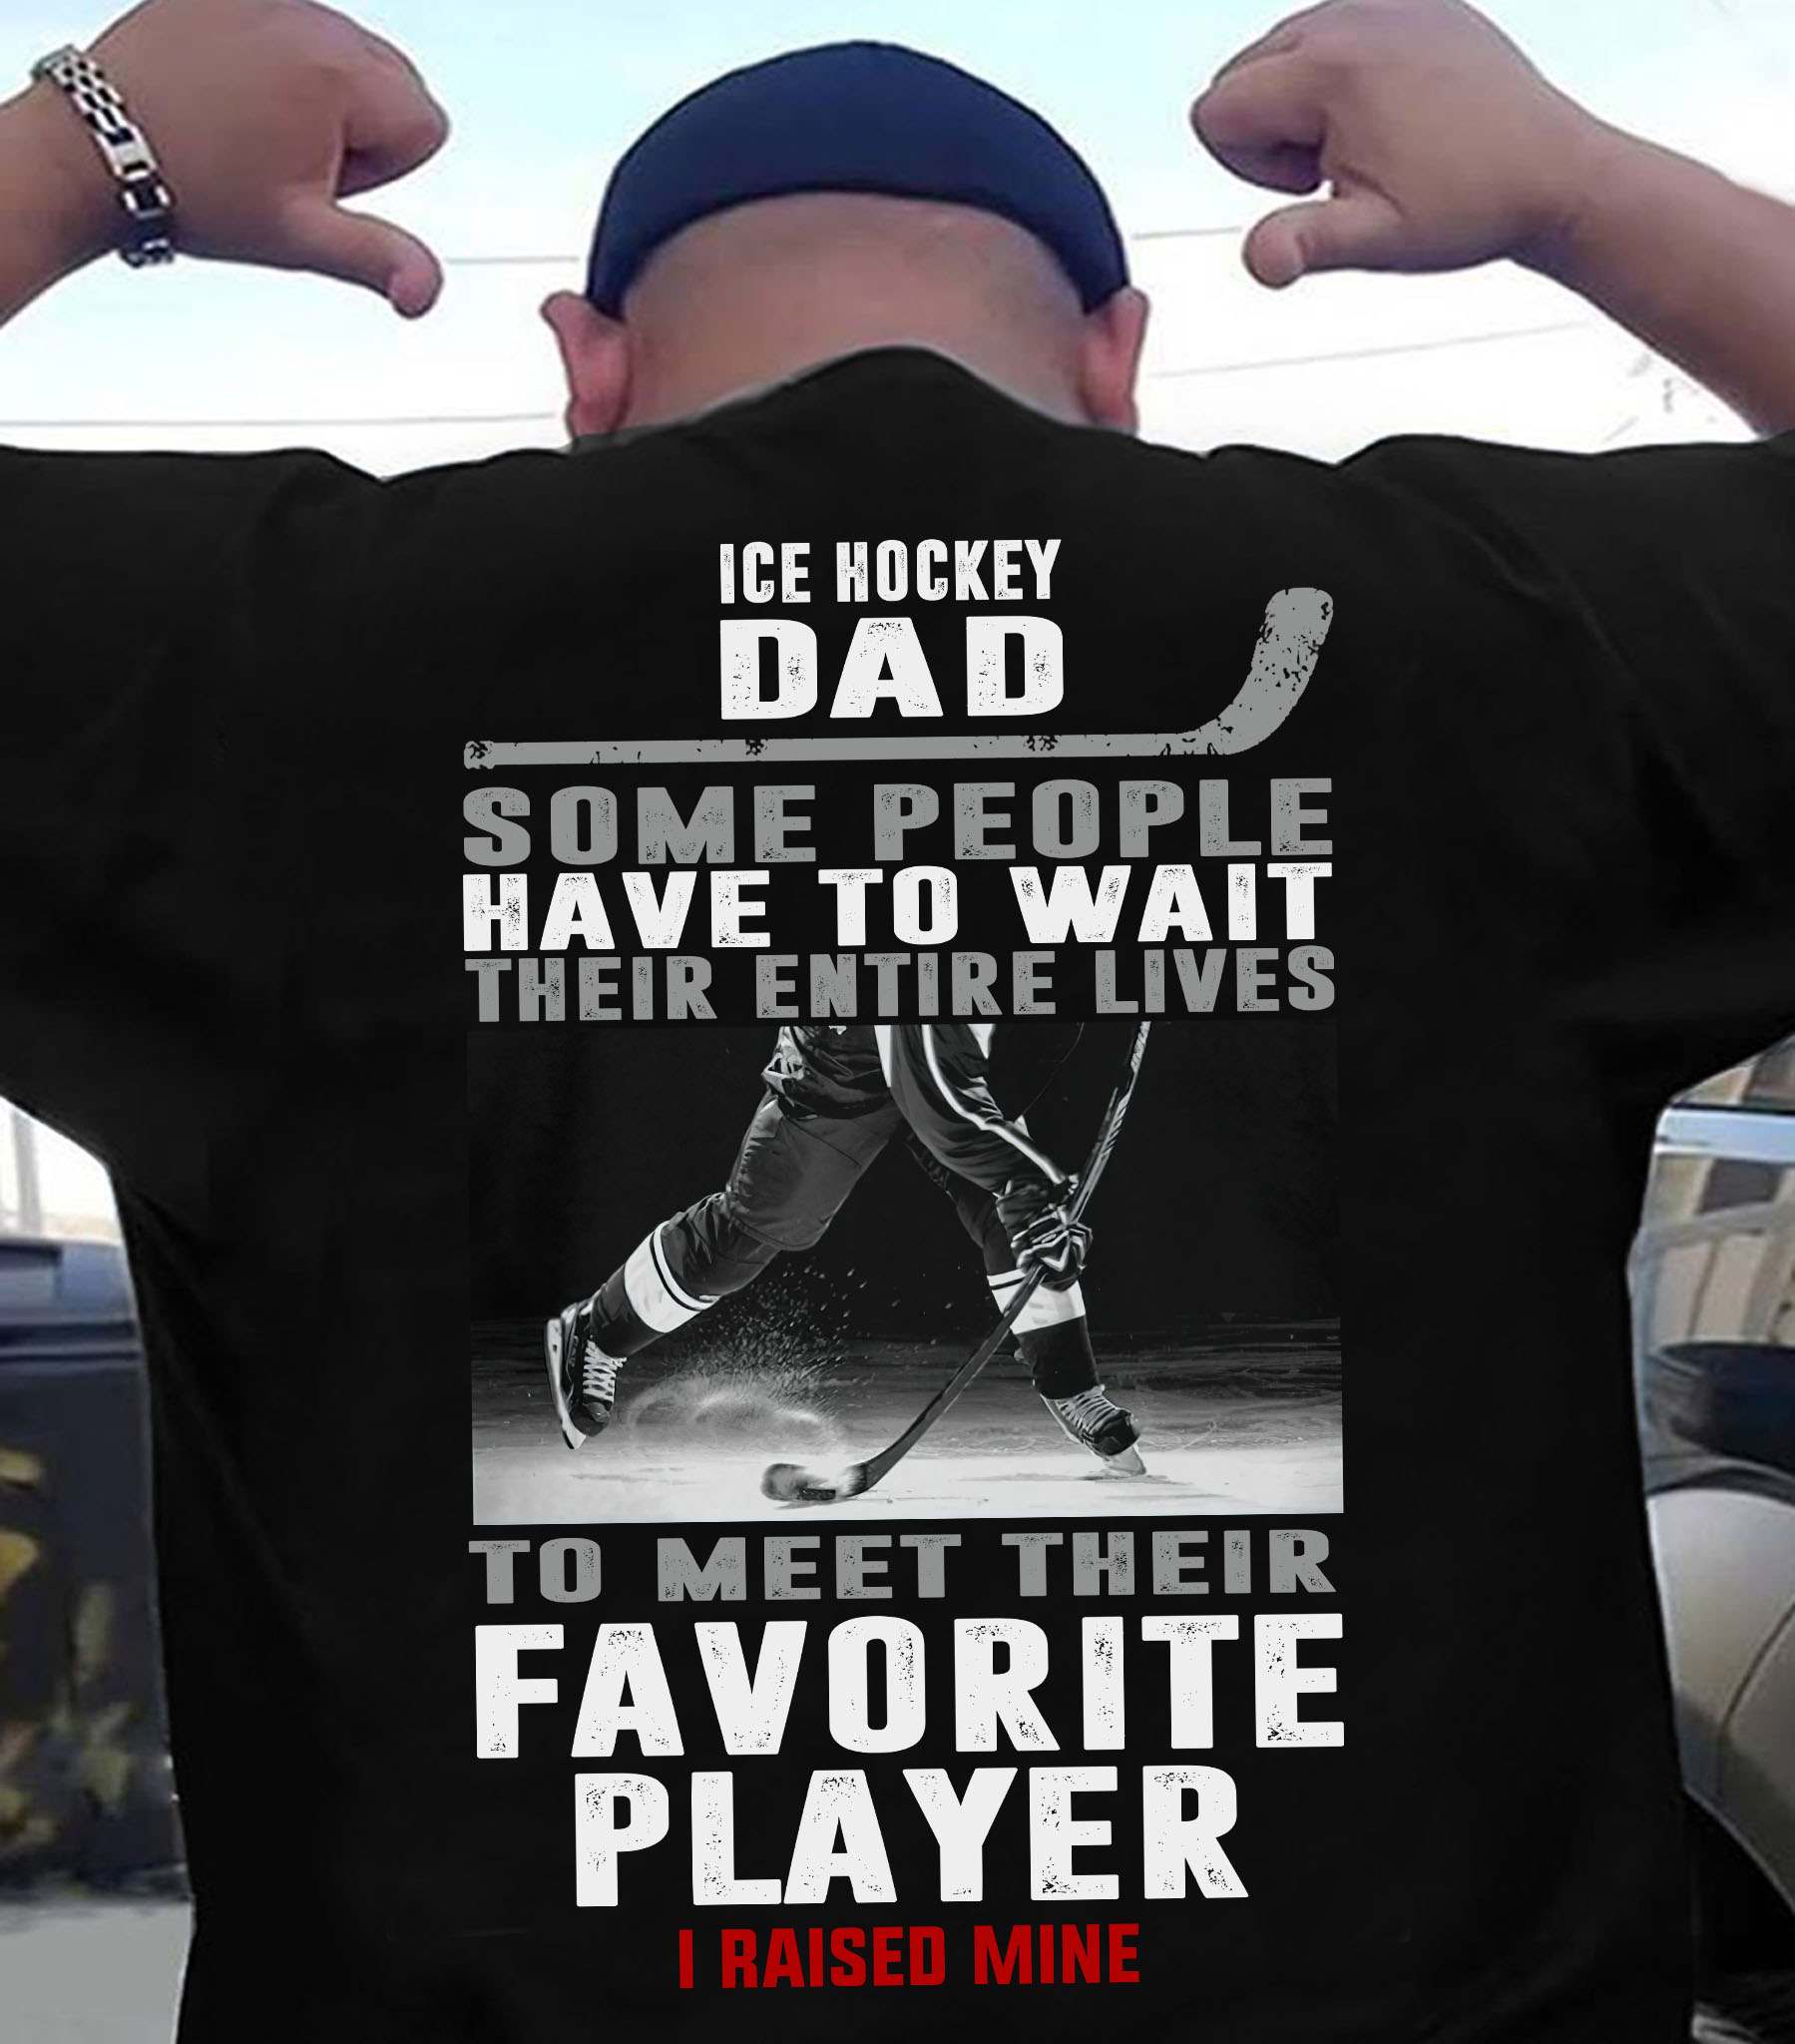 Ice Hockey Player - Ice Hockey dad some people have to wait their entire lives to meet their favourite player